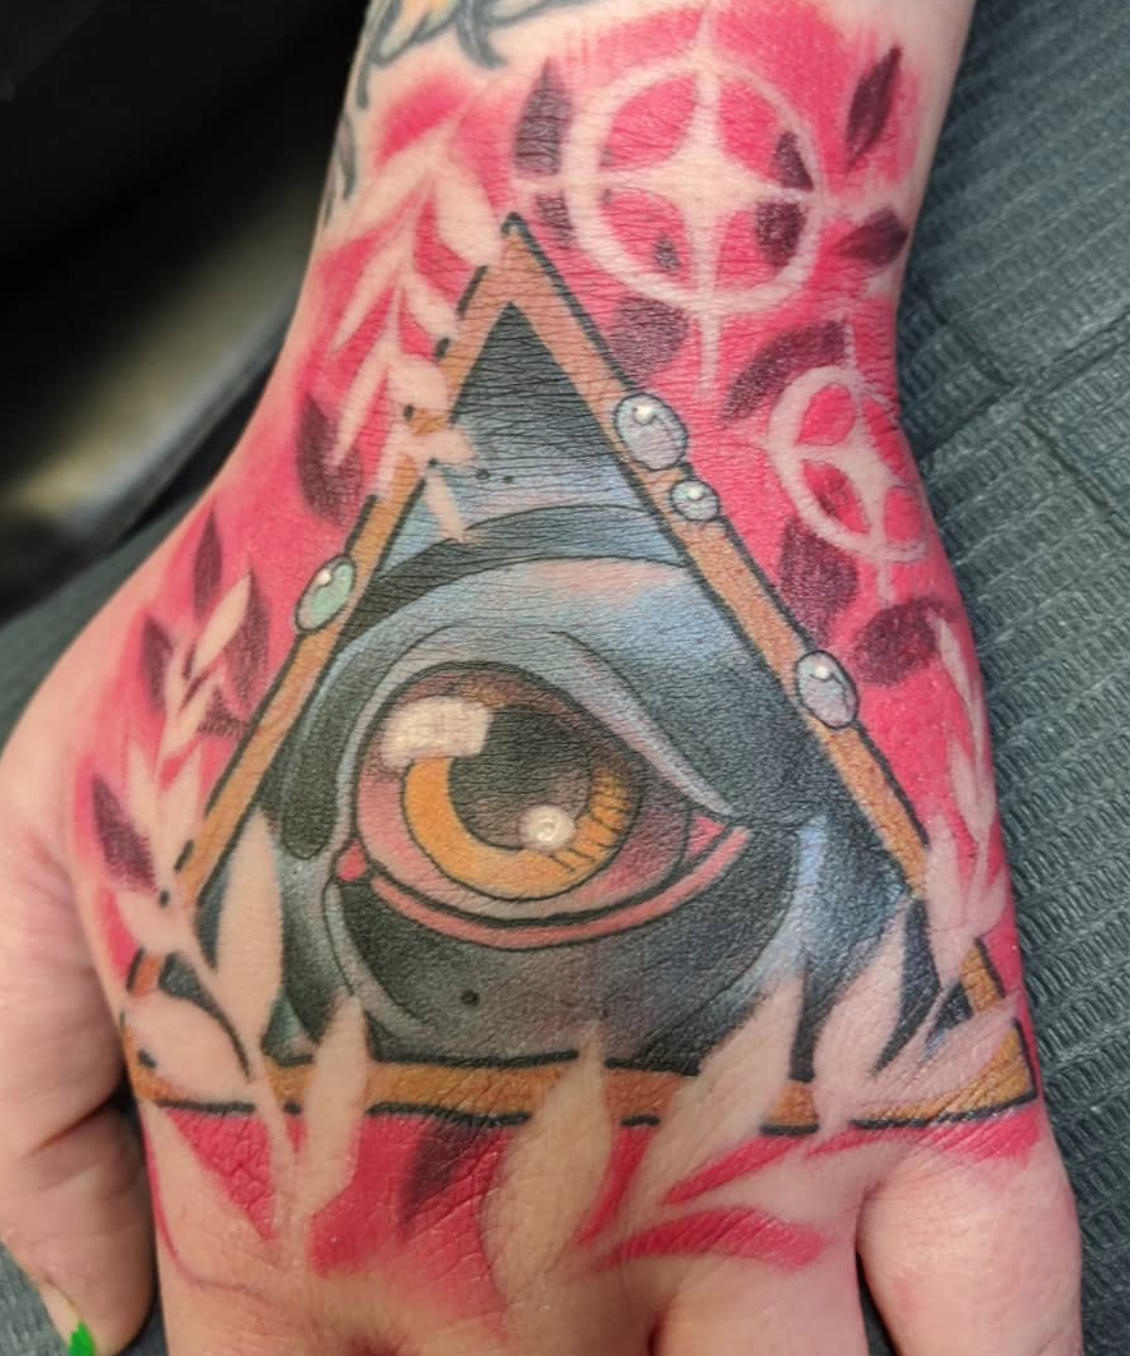 Seeing eye tattoo by Kate Erso